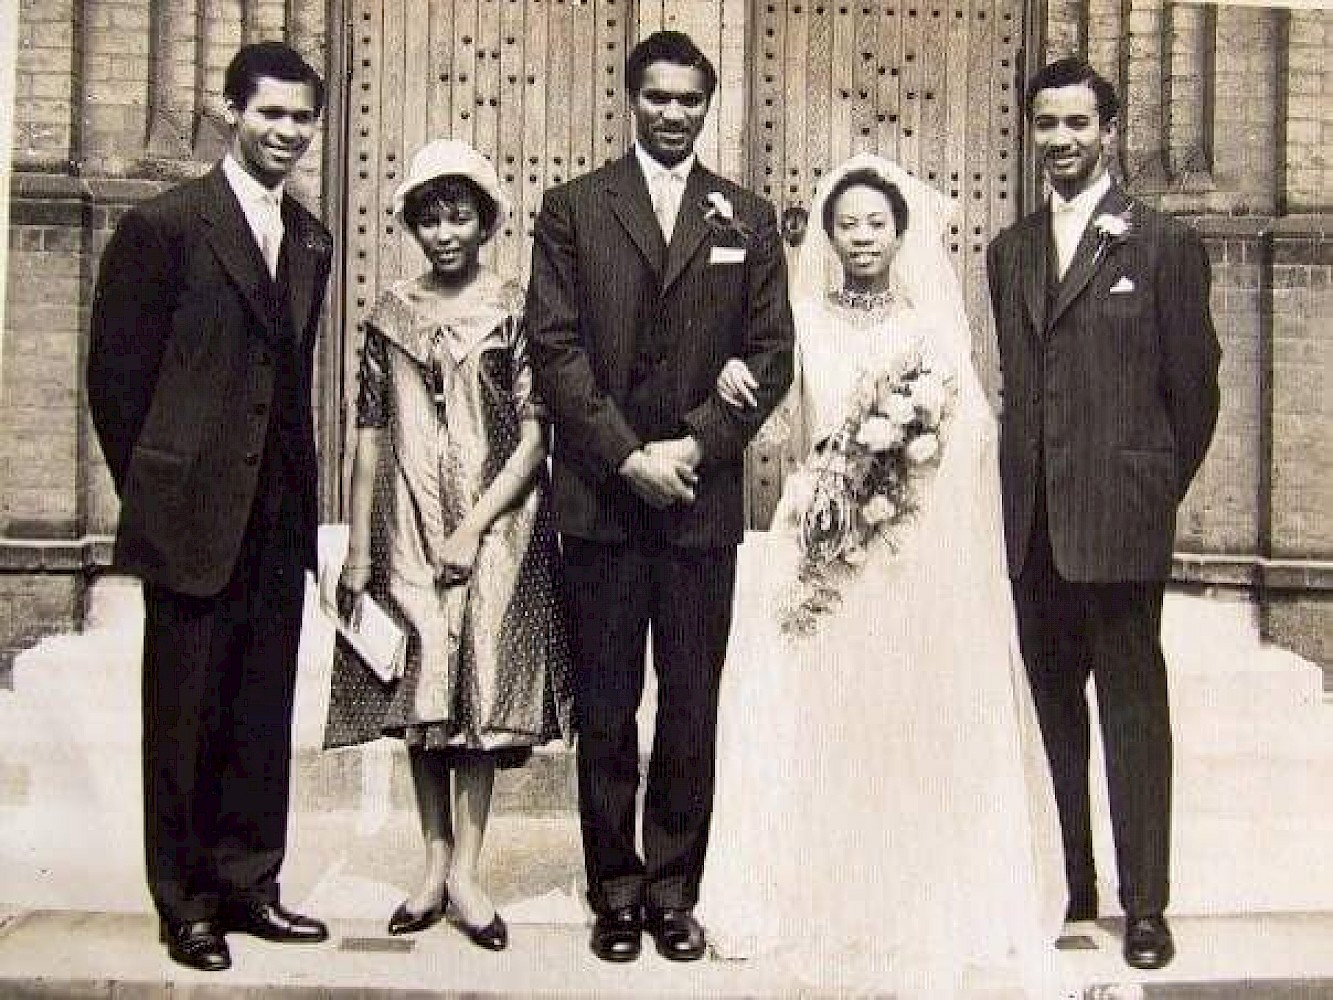 Unidentified photographer. The Wedding of John Willie Kwamina Duncan and Beatrice Orleans-Harding, St. Patrick’s Church, London. From Left to Right: Ekow Duncan, Elaine Buckle, John Willie Kwamina Duncan, Beatrice Duncan née Orleans-Harding, Josbert Thomas Kofi Duncan. August 22, 1959